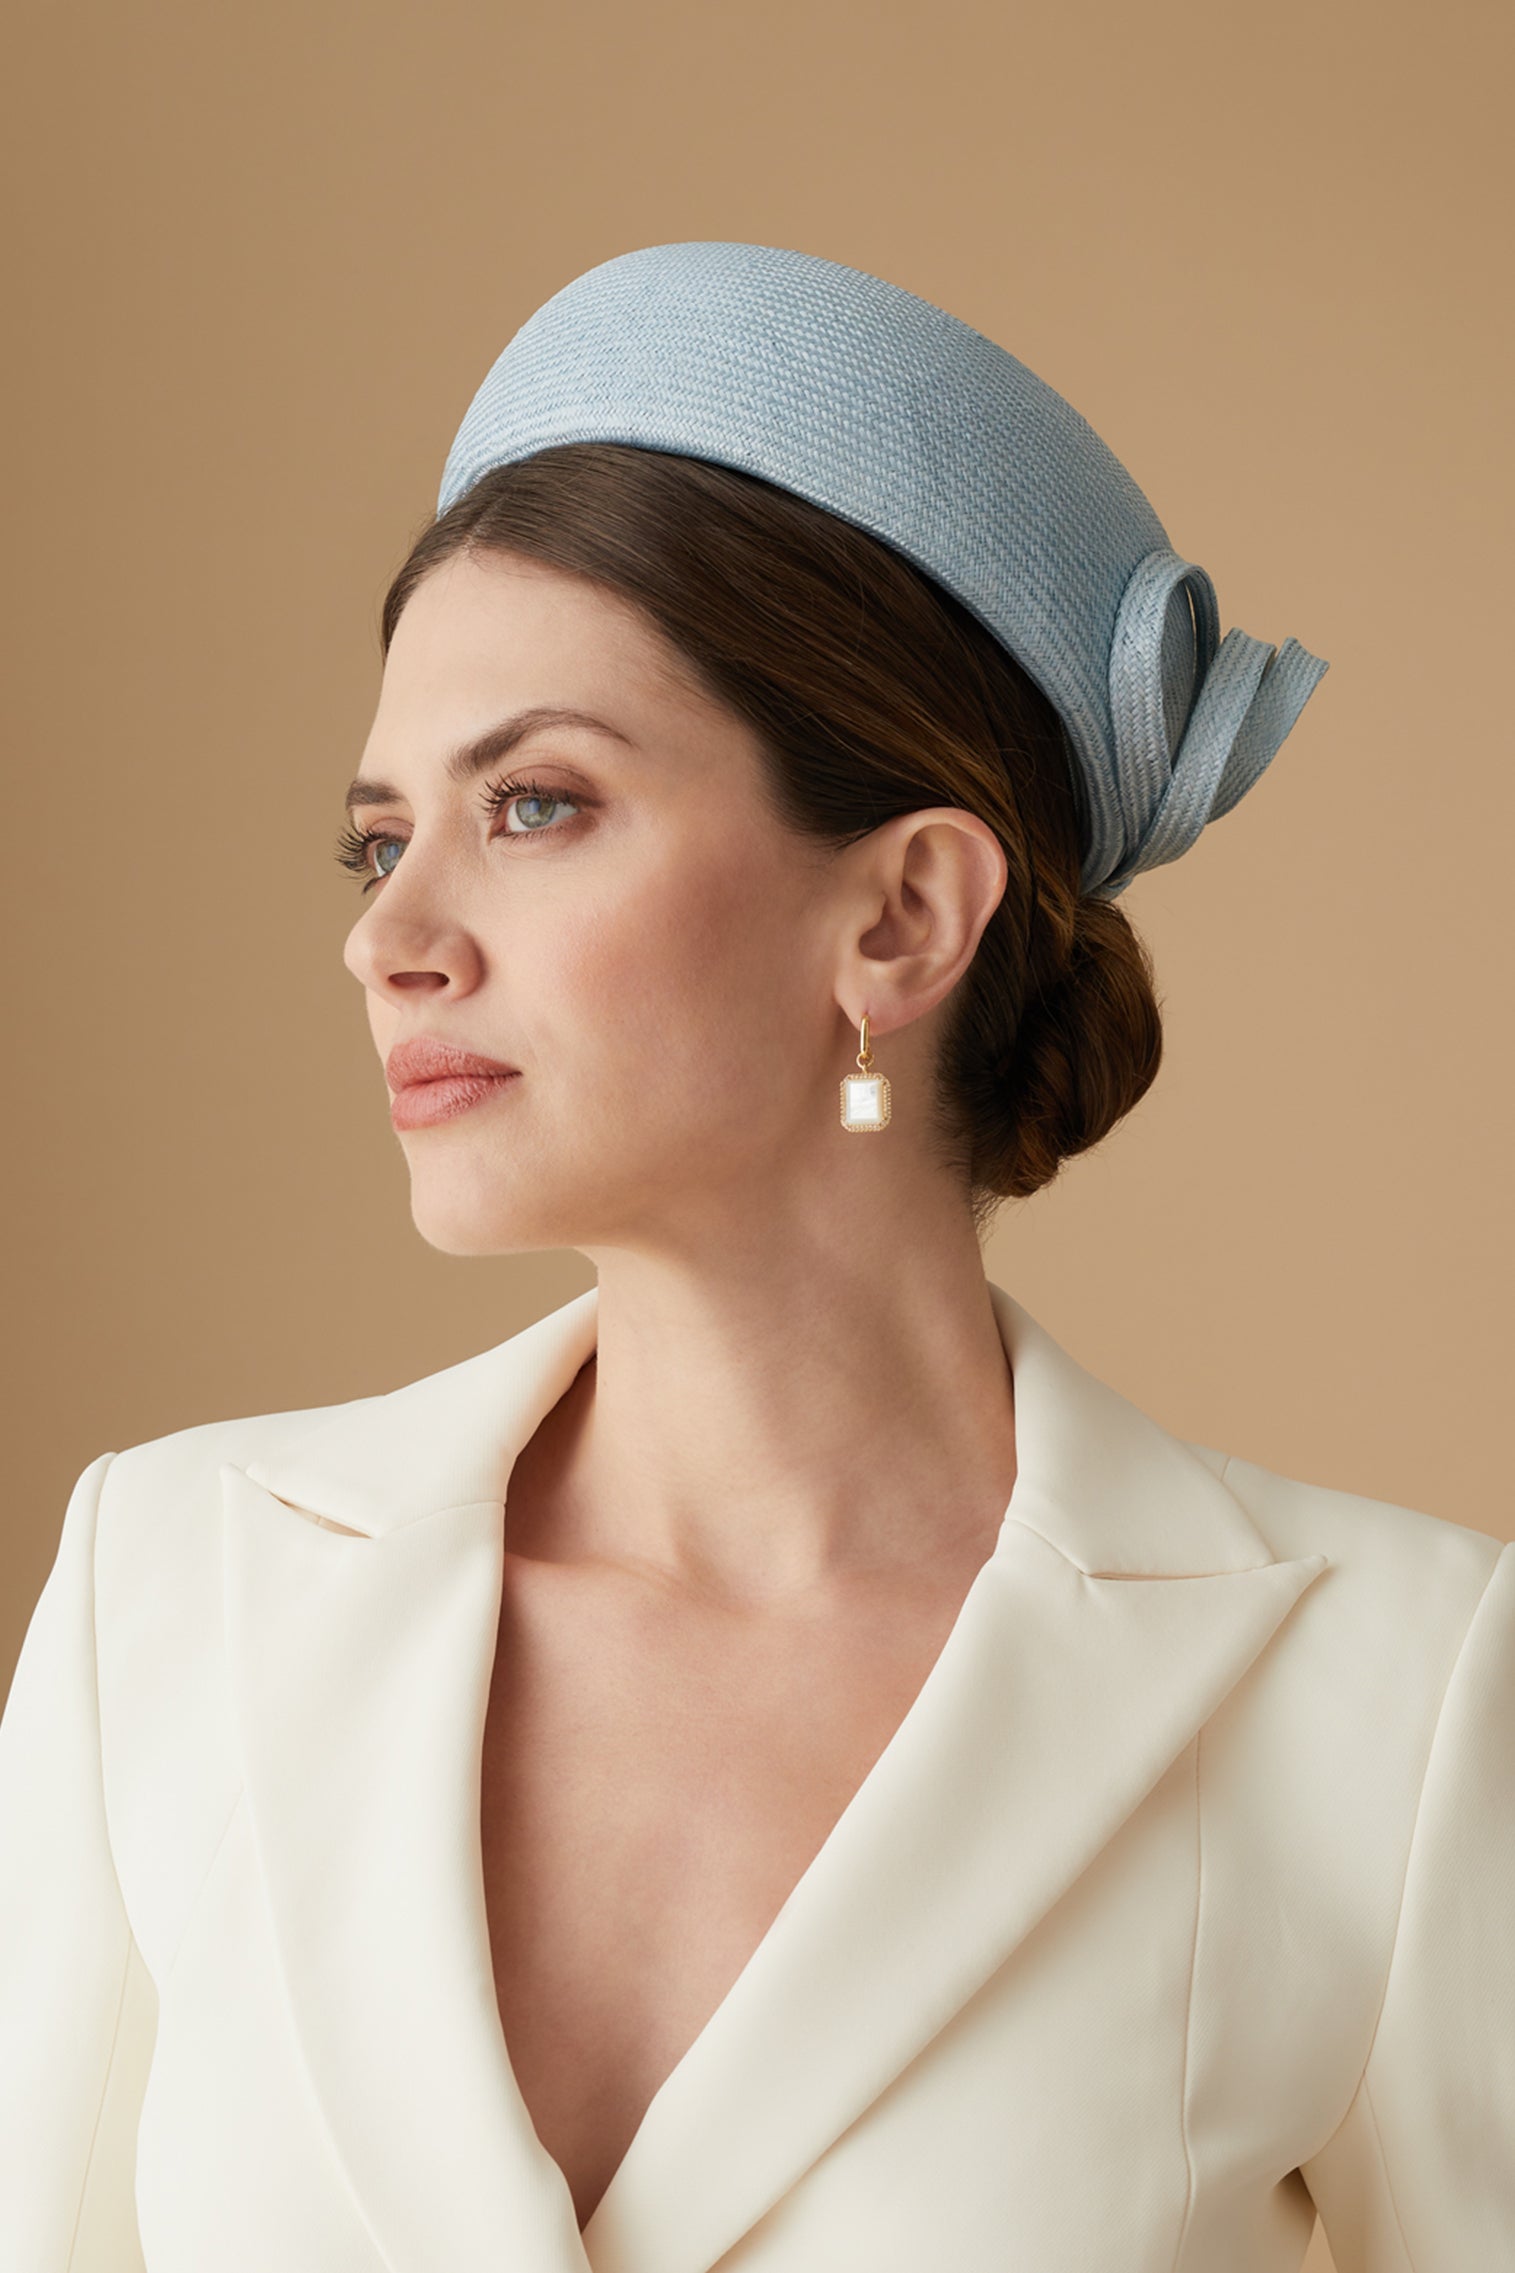 Verbena Pale Blue Pillbox Hat - Lock Couture by Awon Golding - Lock & Co. Hatters London UK